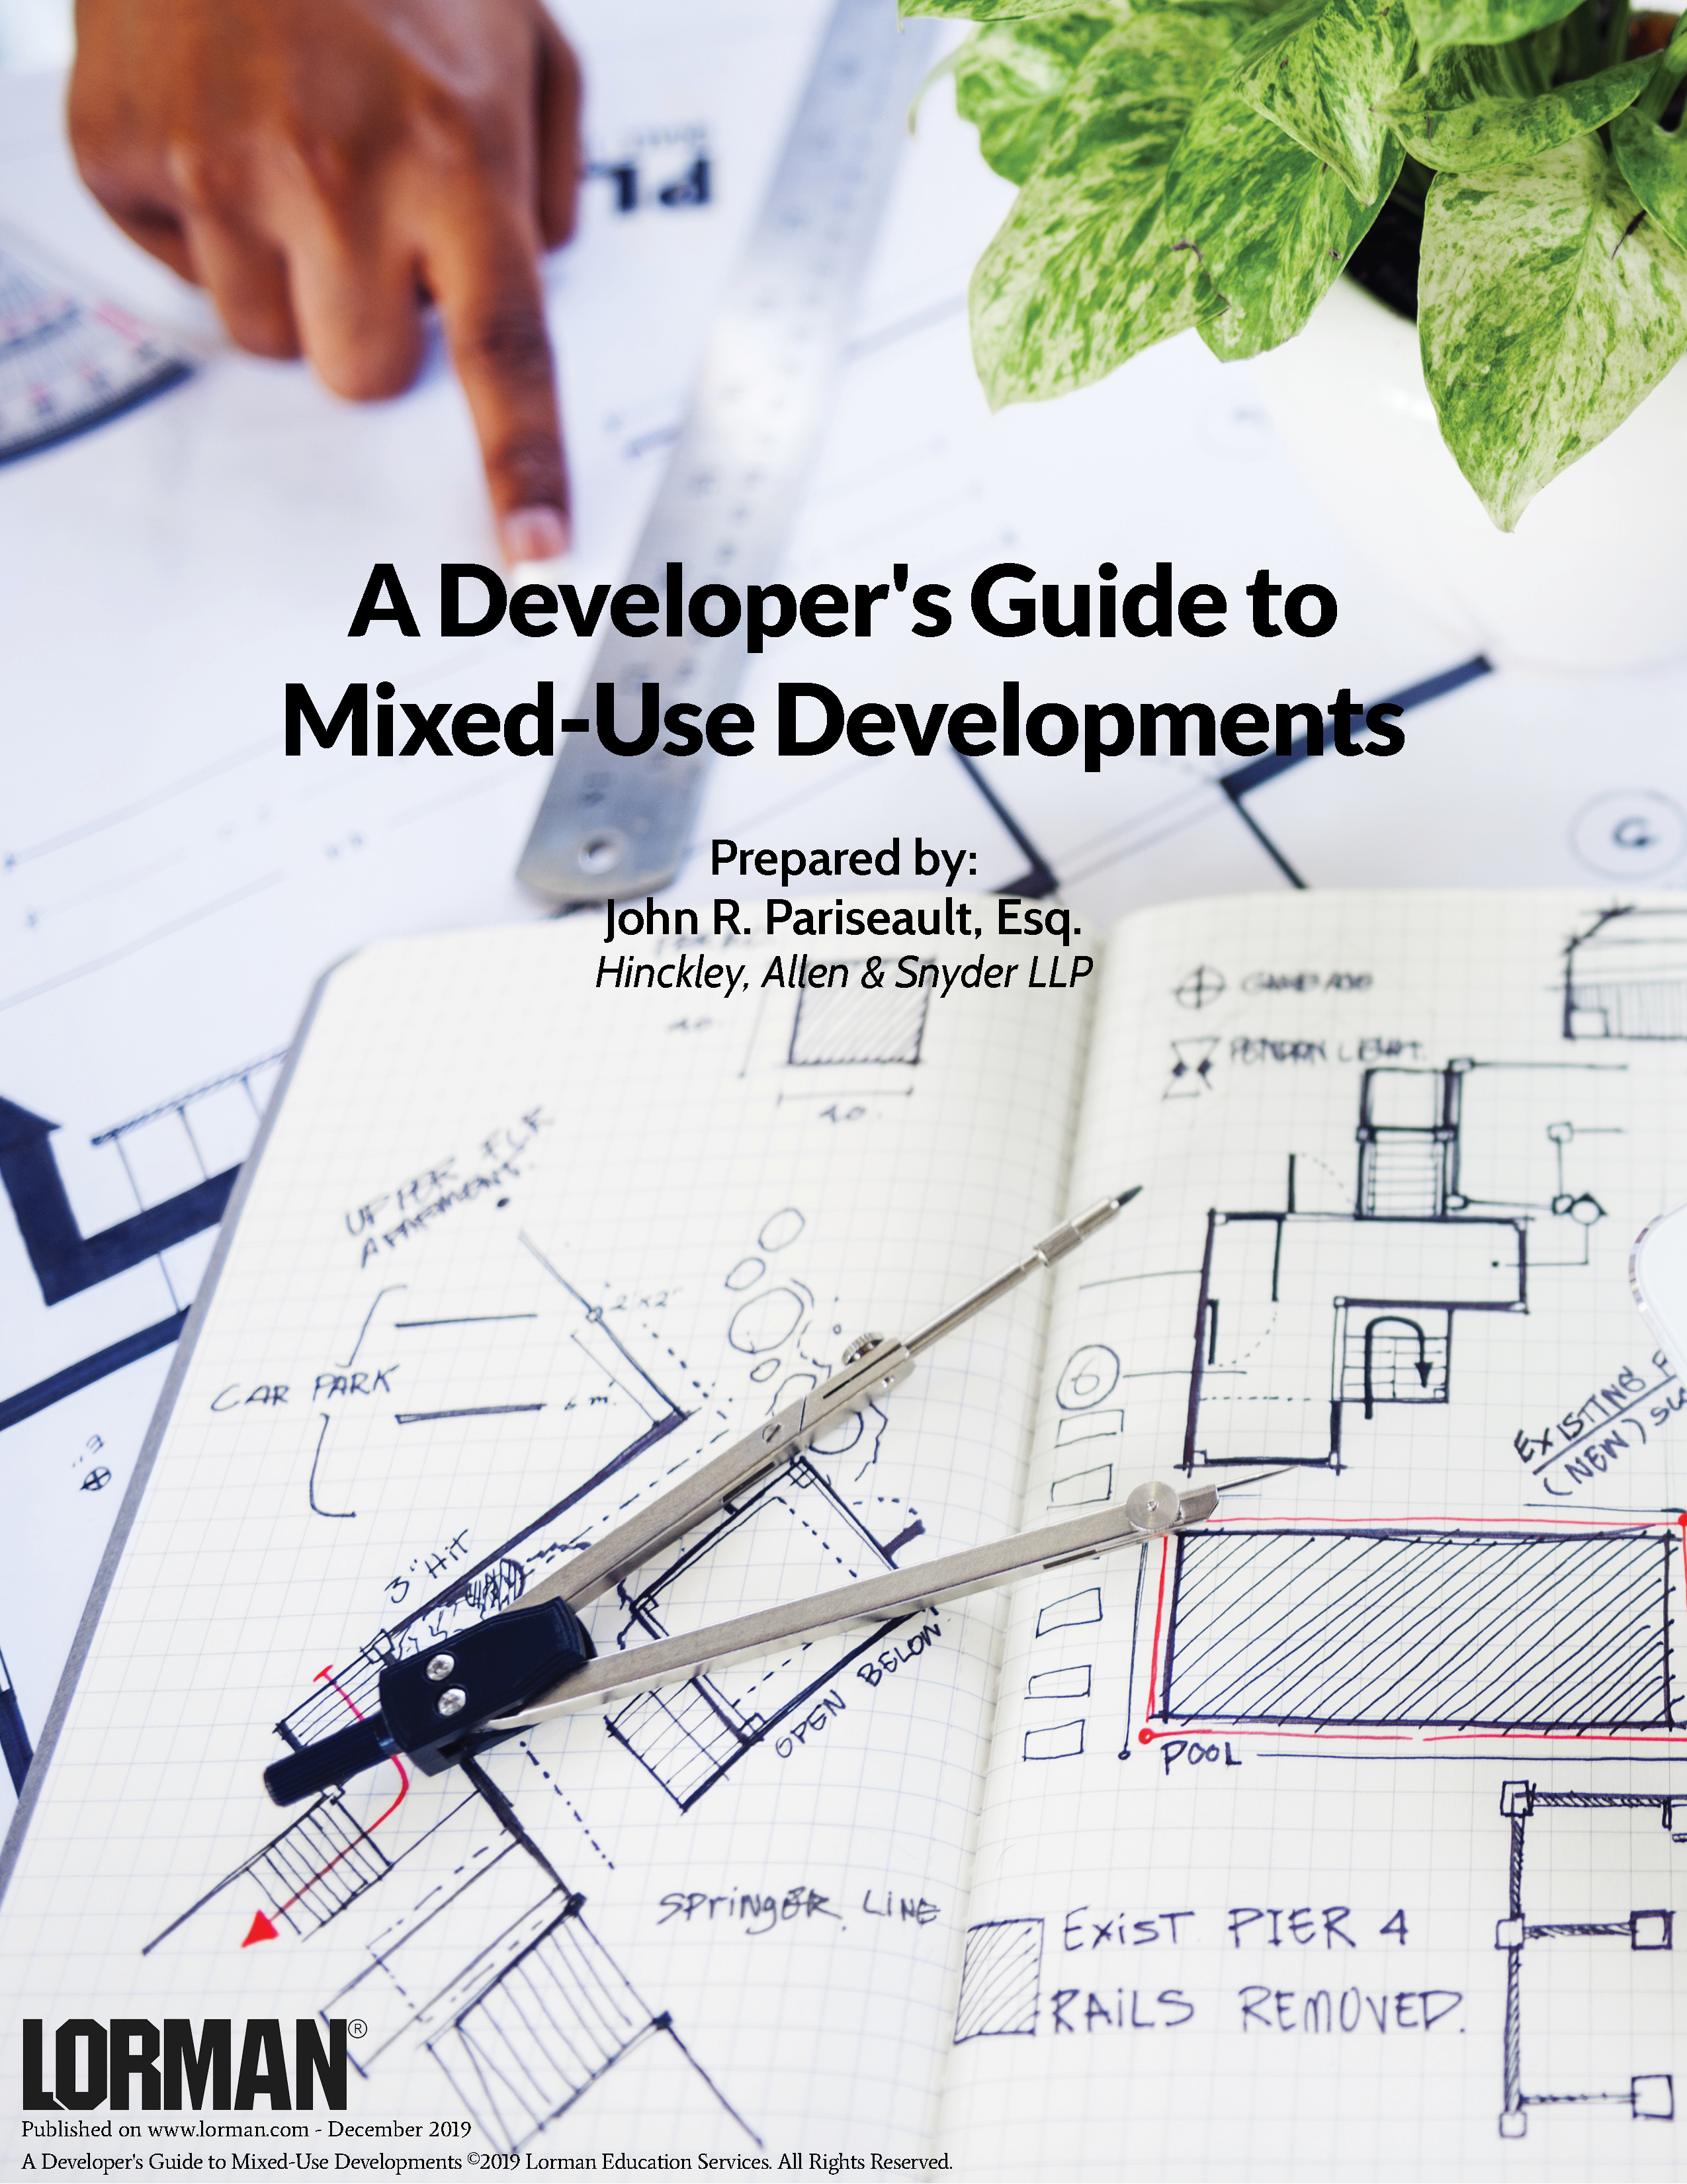 A Developer's Guide to Mixed-Use Developments